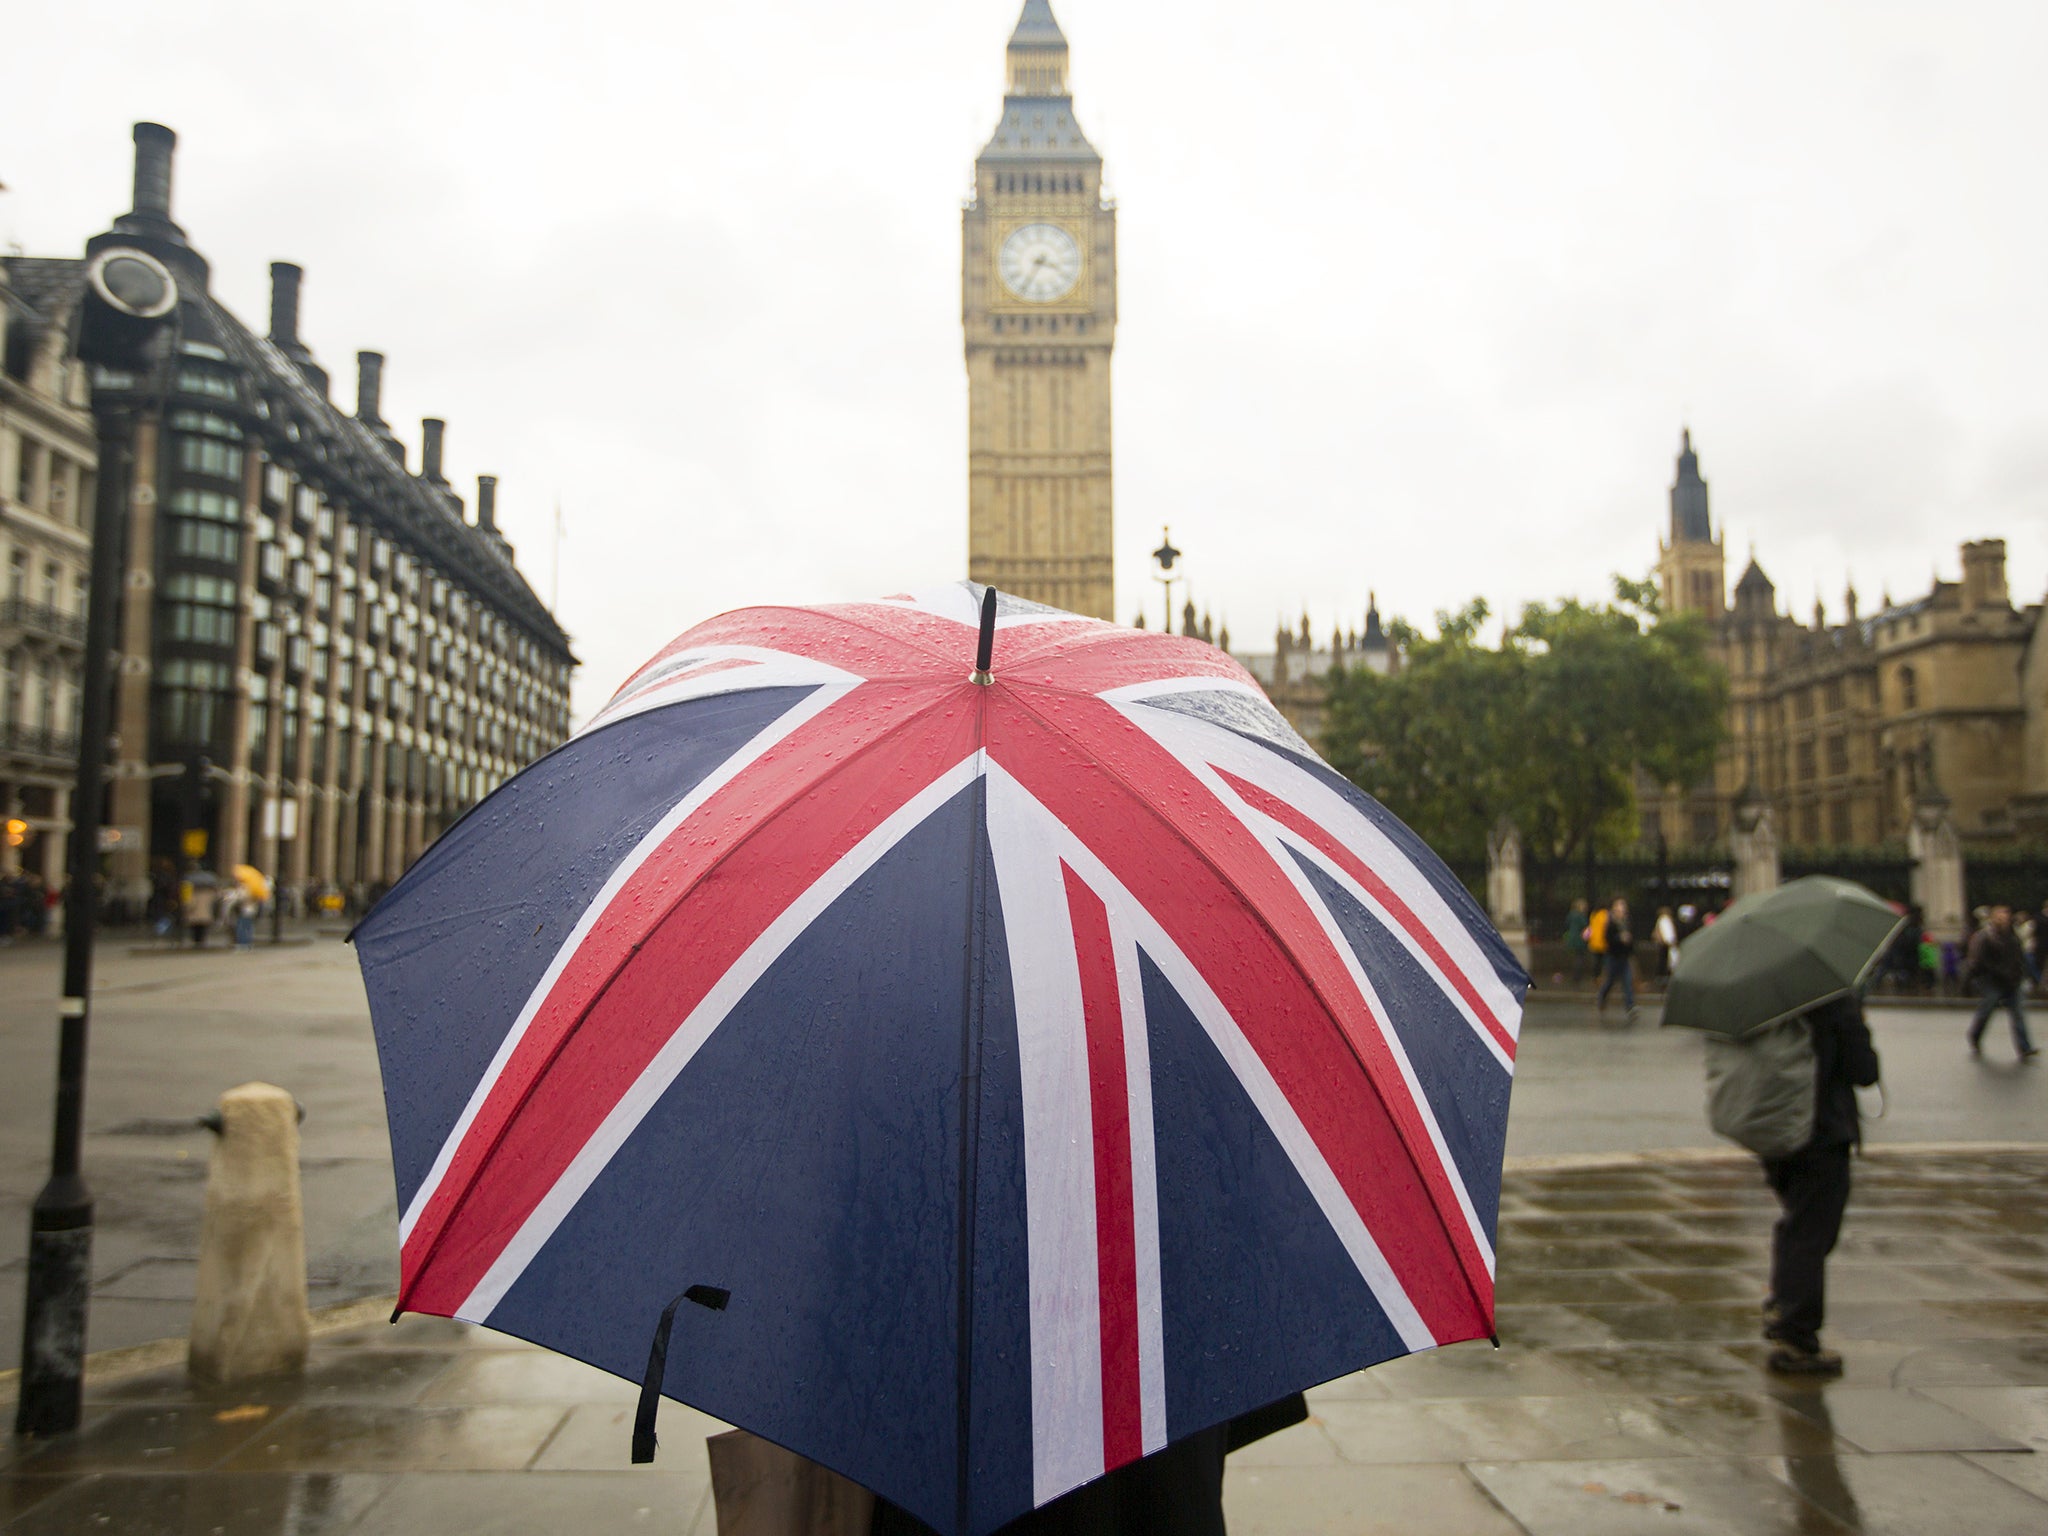 A woman shelters from the rain under an umbrella in front of the Houses of Parliament in central London